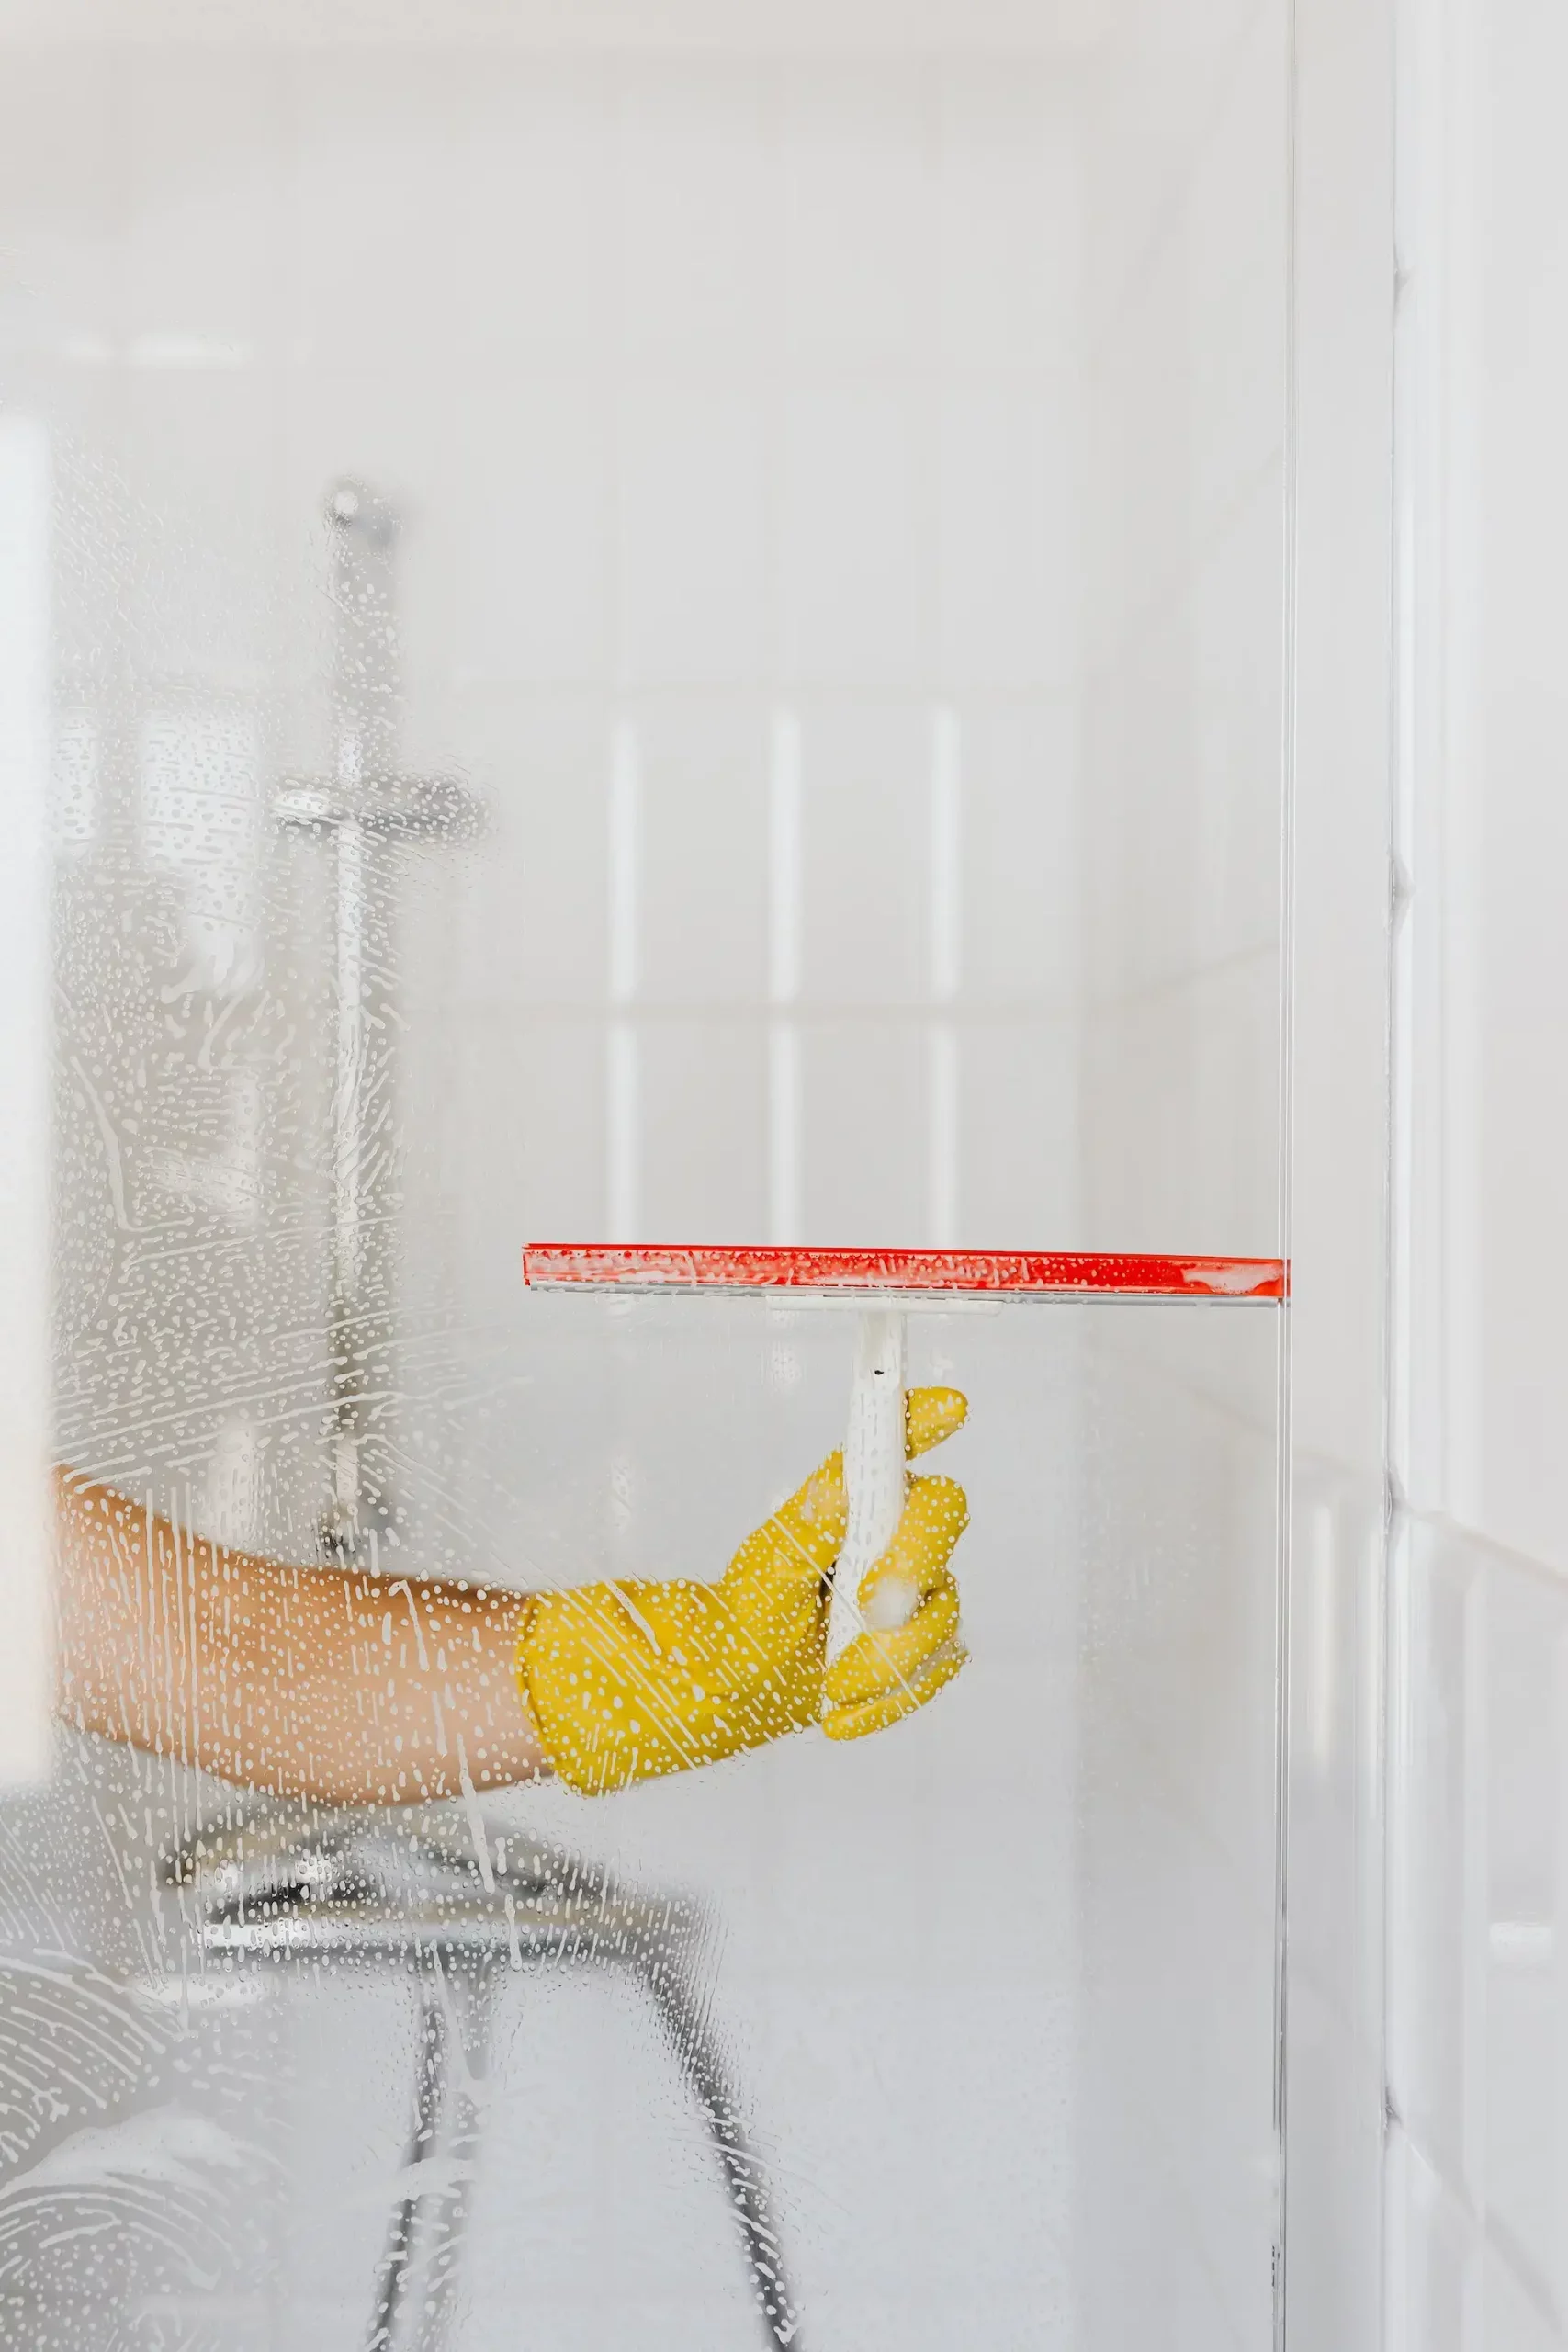 How To Use a Shower Squeegee for Maximum Efficiency - DIY House Projects